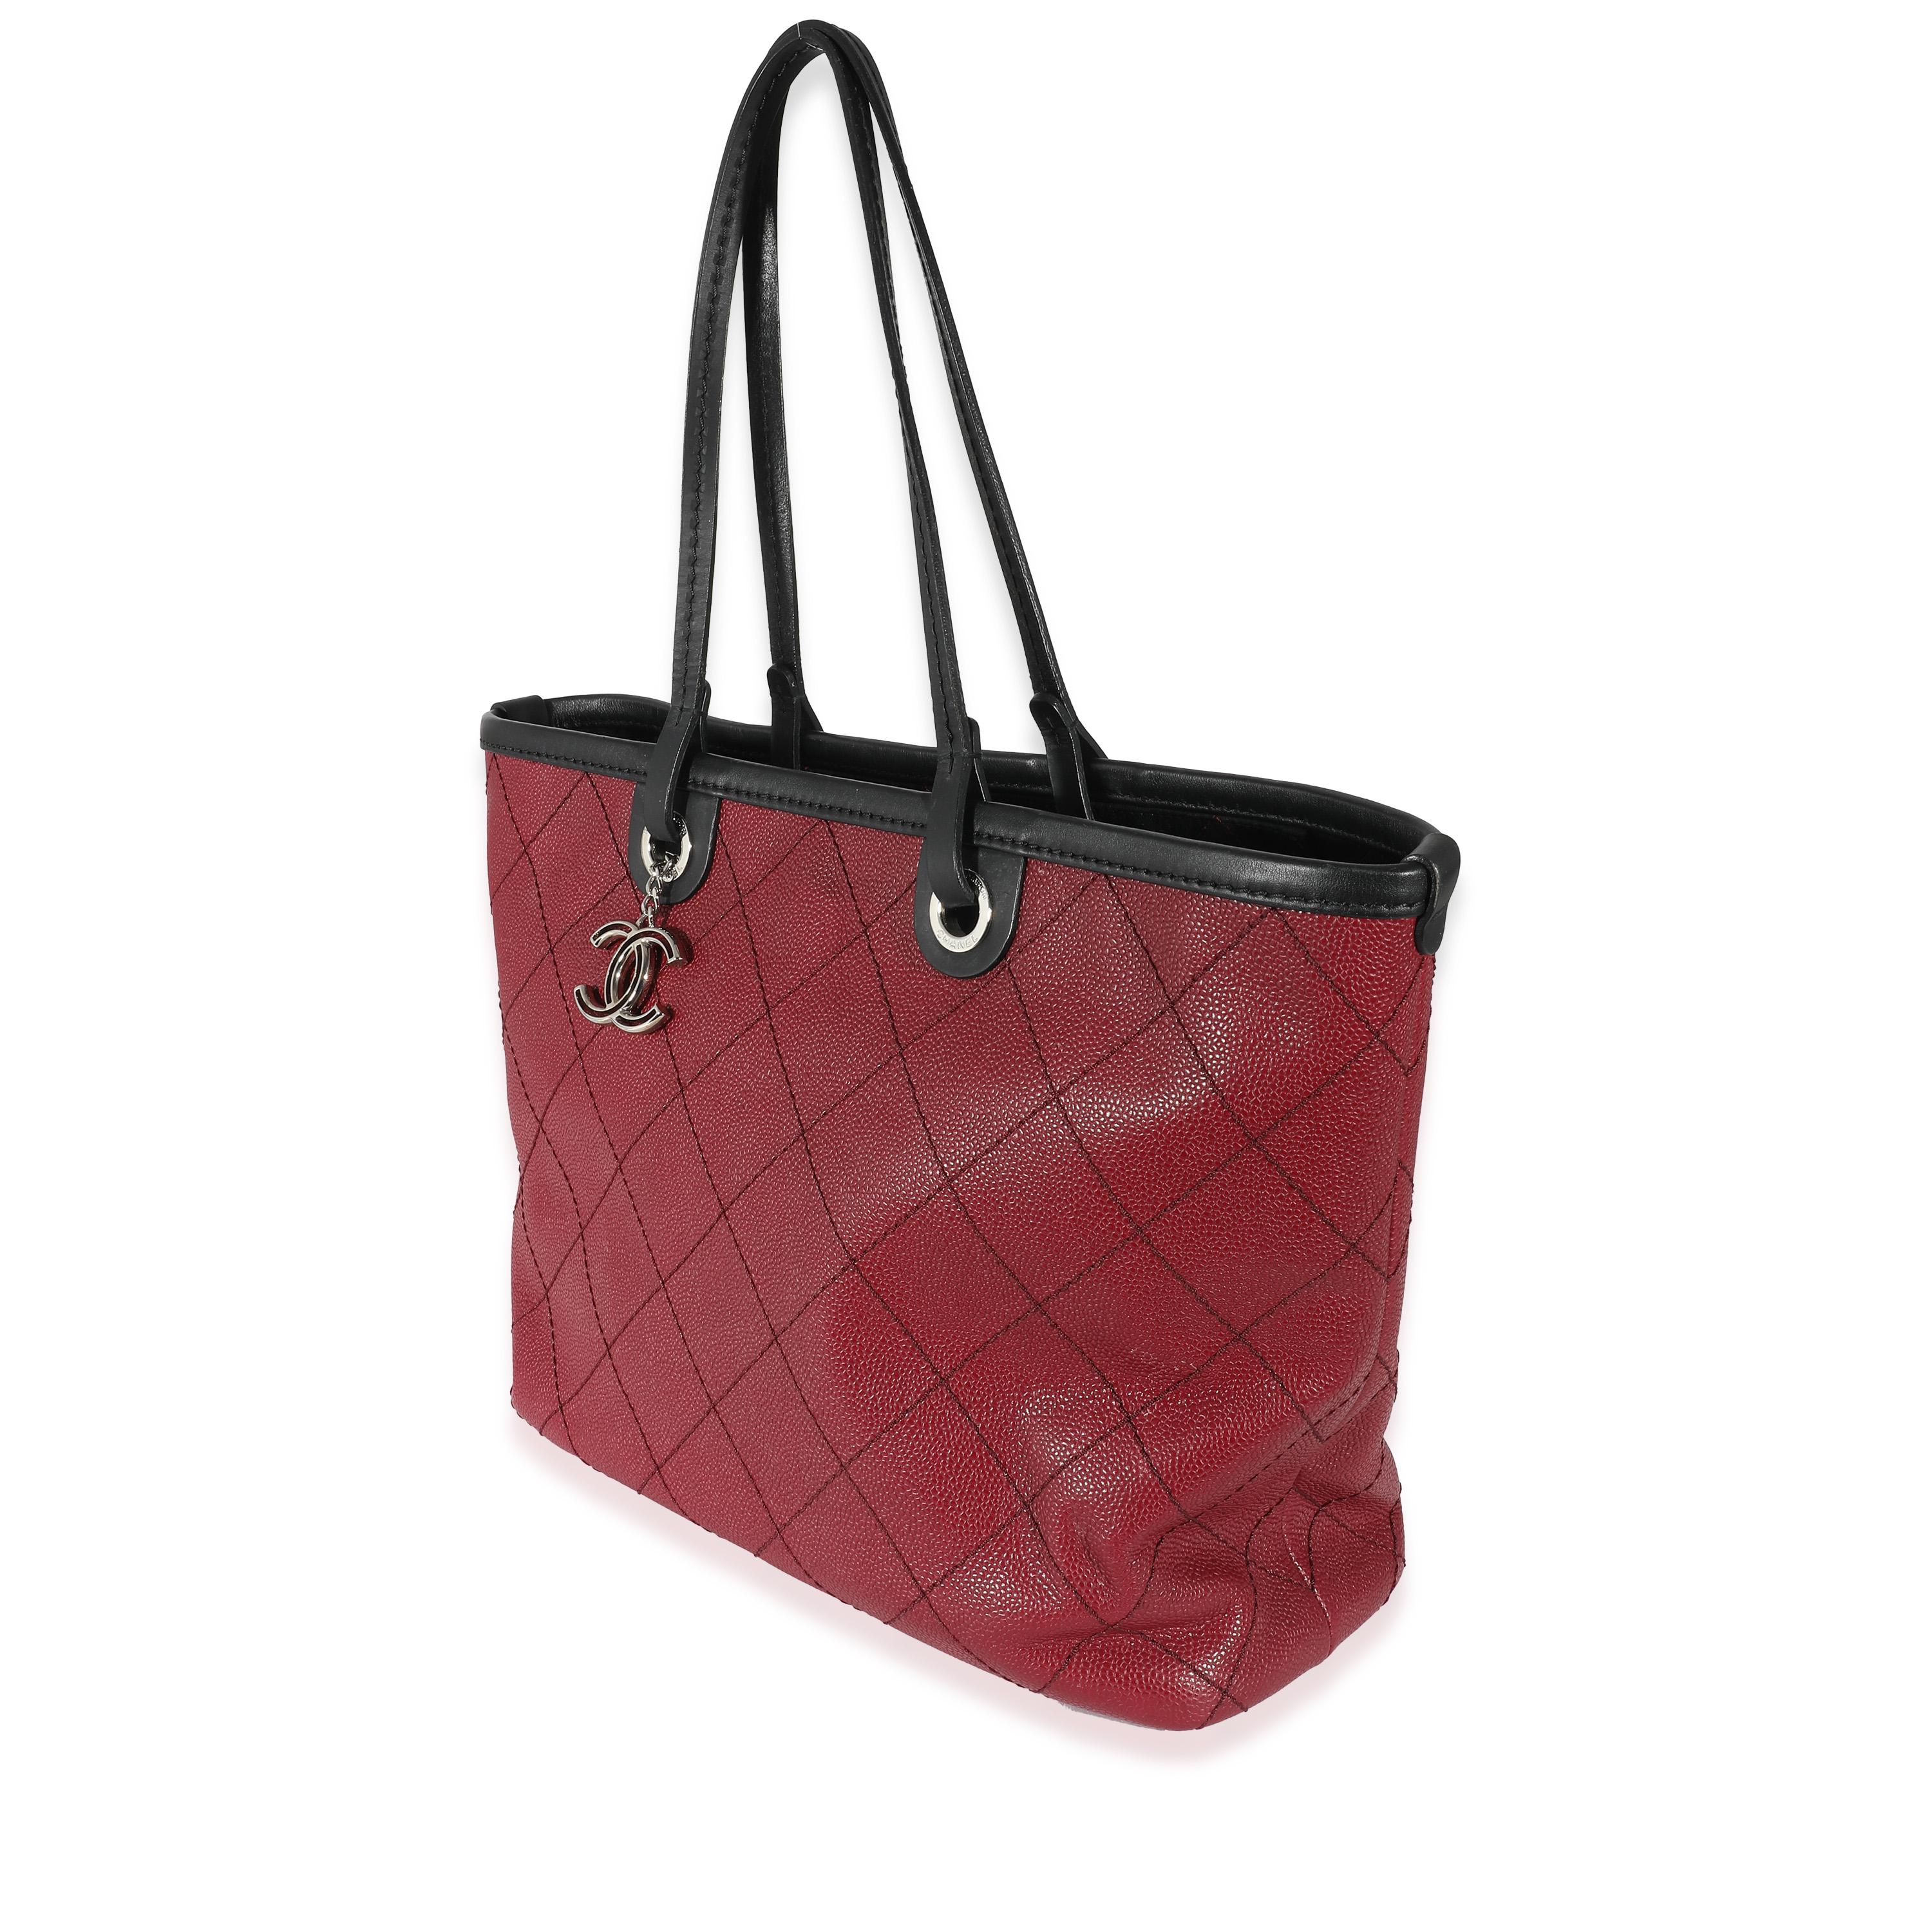 Listing Title: Chanel Burgundy Quilted Caviar Fever Tote
SKU: 135423
Condition: Pre-owned 
Handbag Condition: Very Good
Condition Comments: Item is in very good condition with minor signs of wear. Exterior scuffing along corners and throughout.